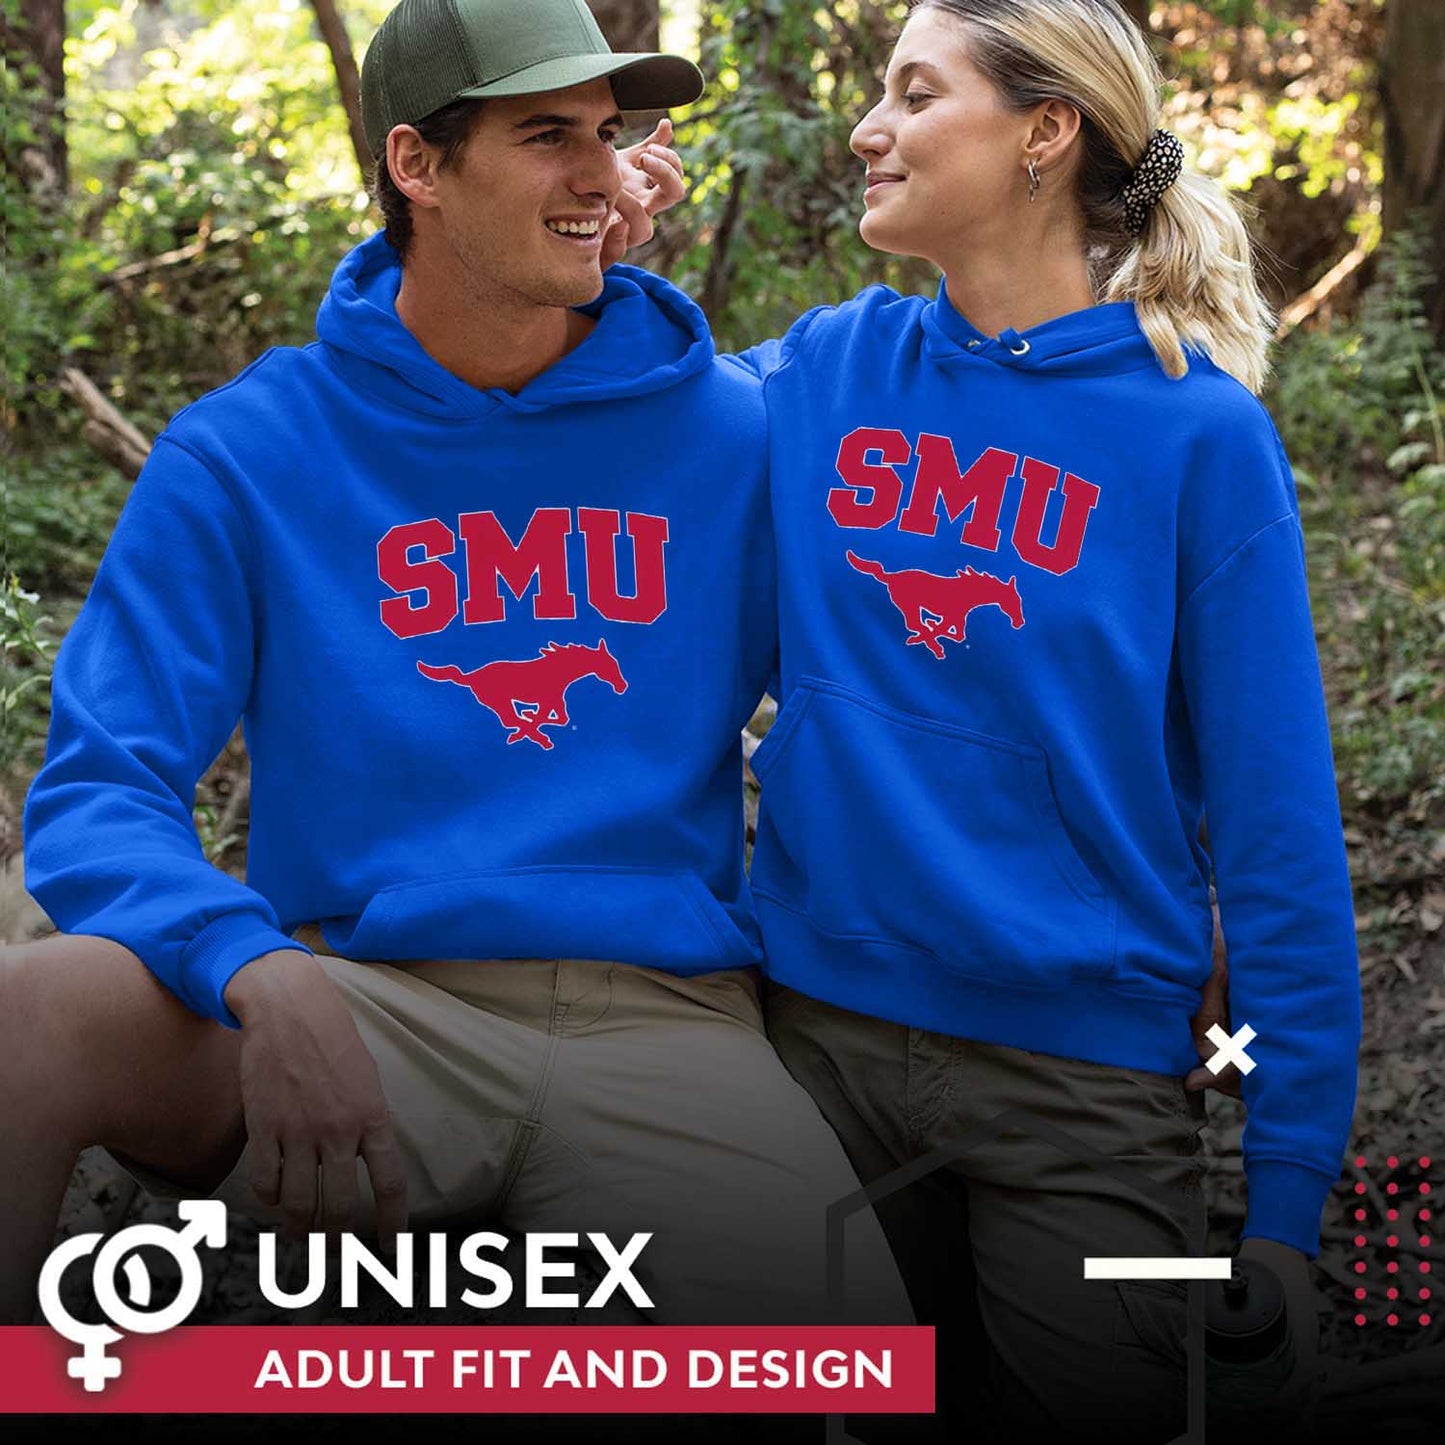 SMU Mustangs Campus Colors Adult Arch & Logo Soft Style Gameday Hooded Sweatshirt  - Royal